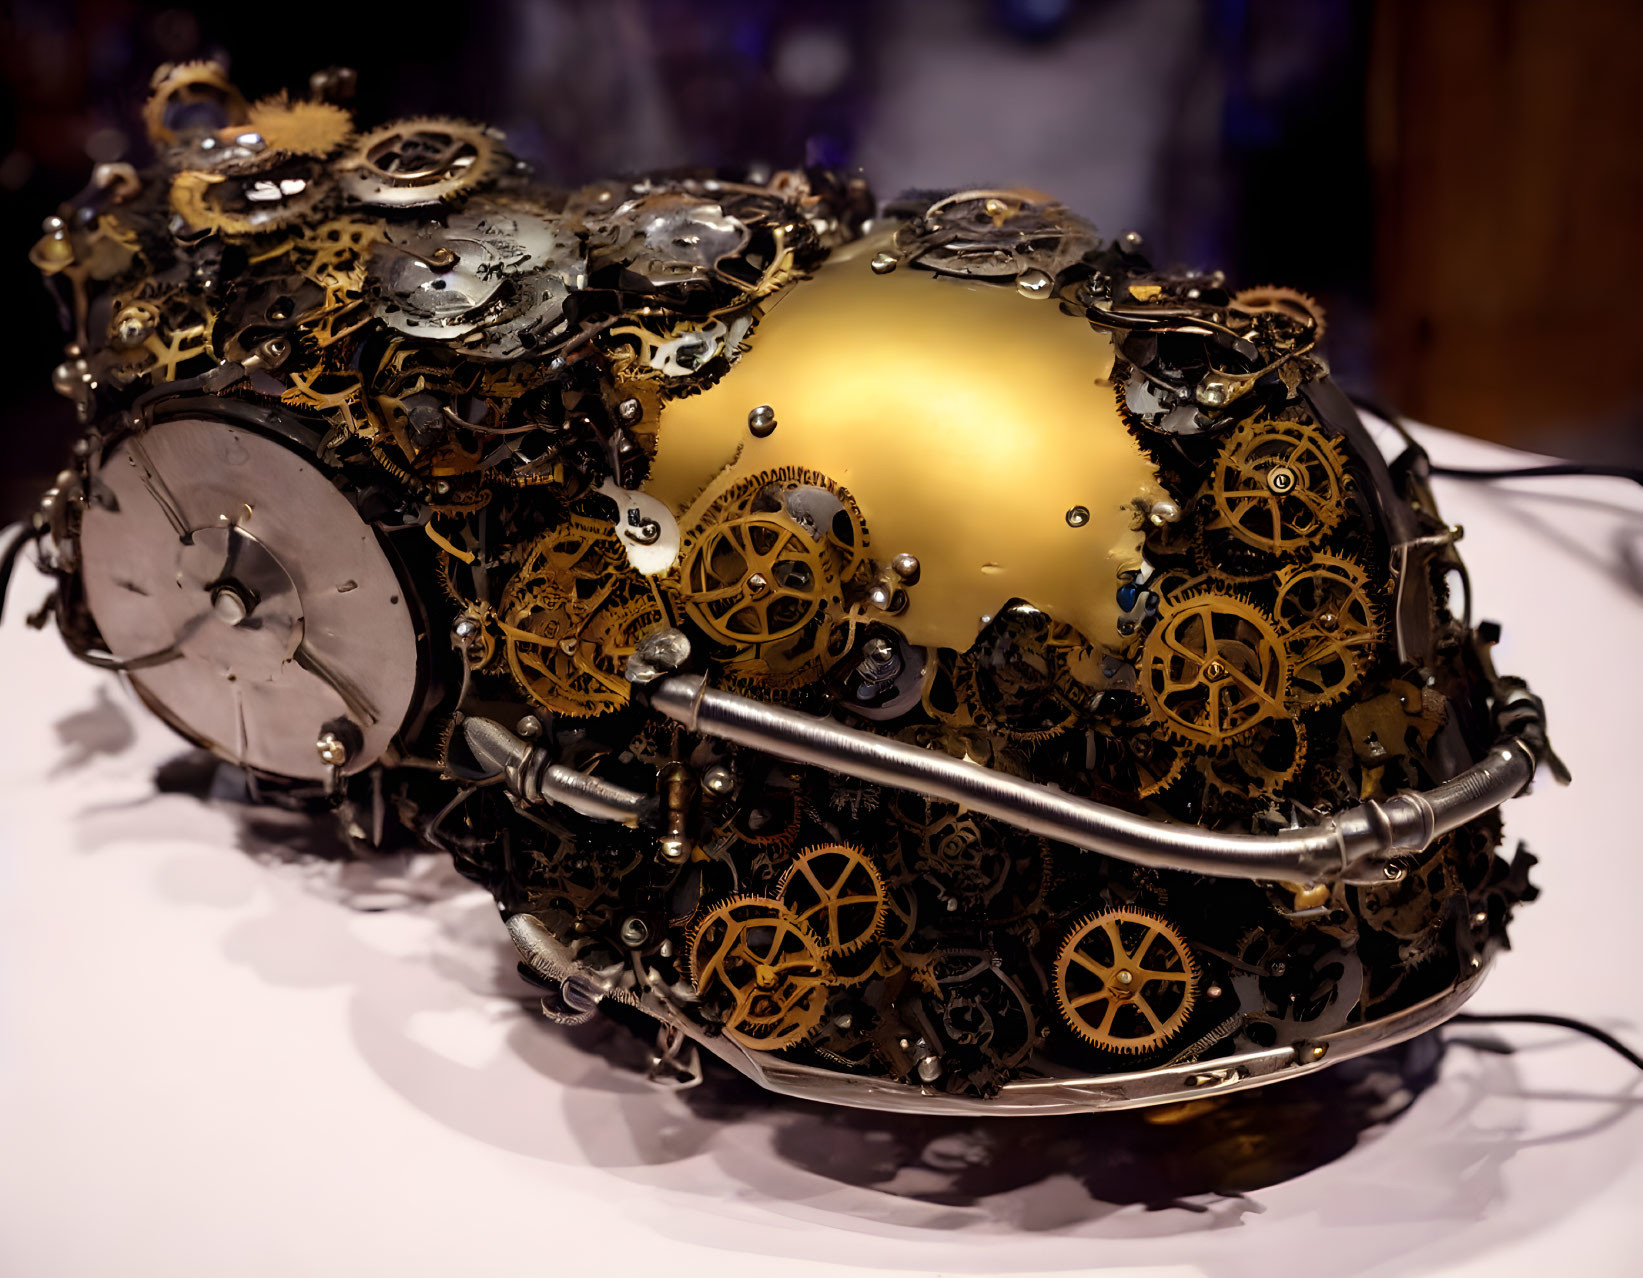 Detailed Steampunk-Style Helmet with Gears and Brass Accents